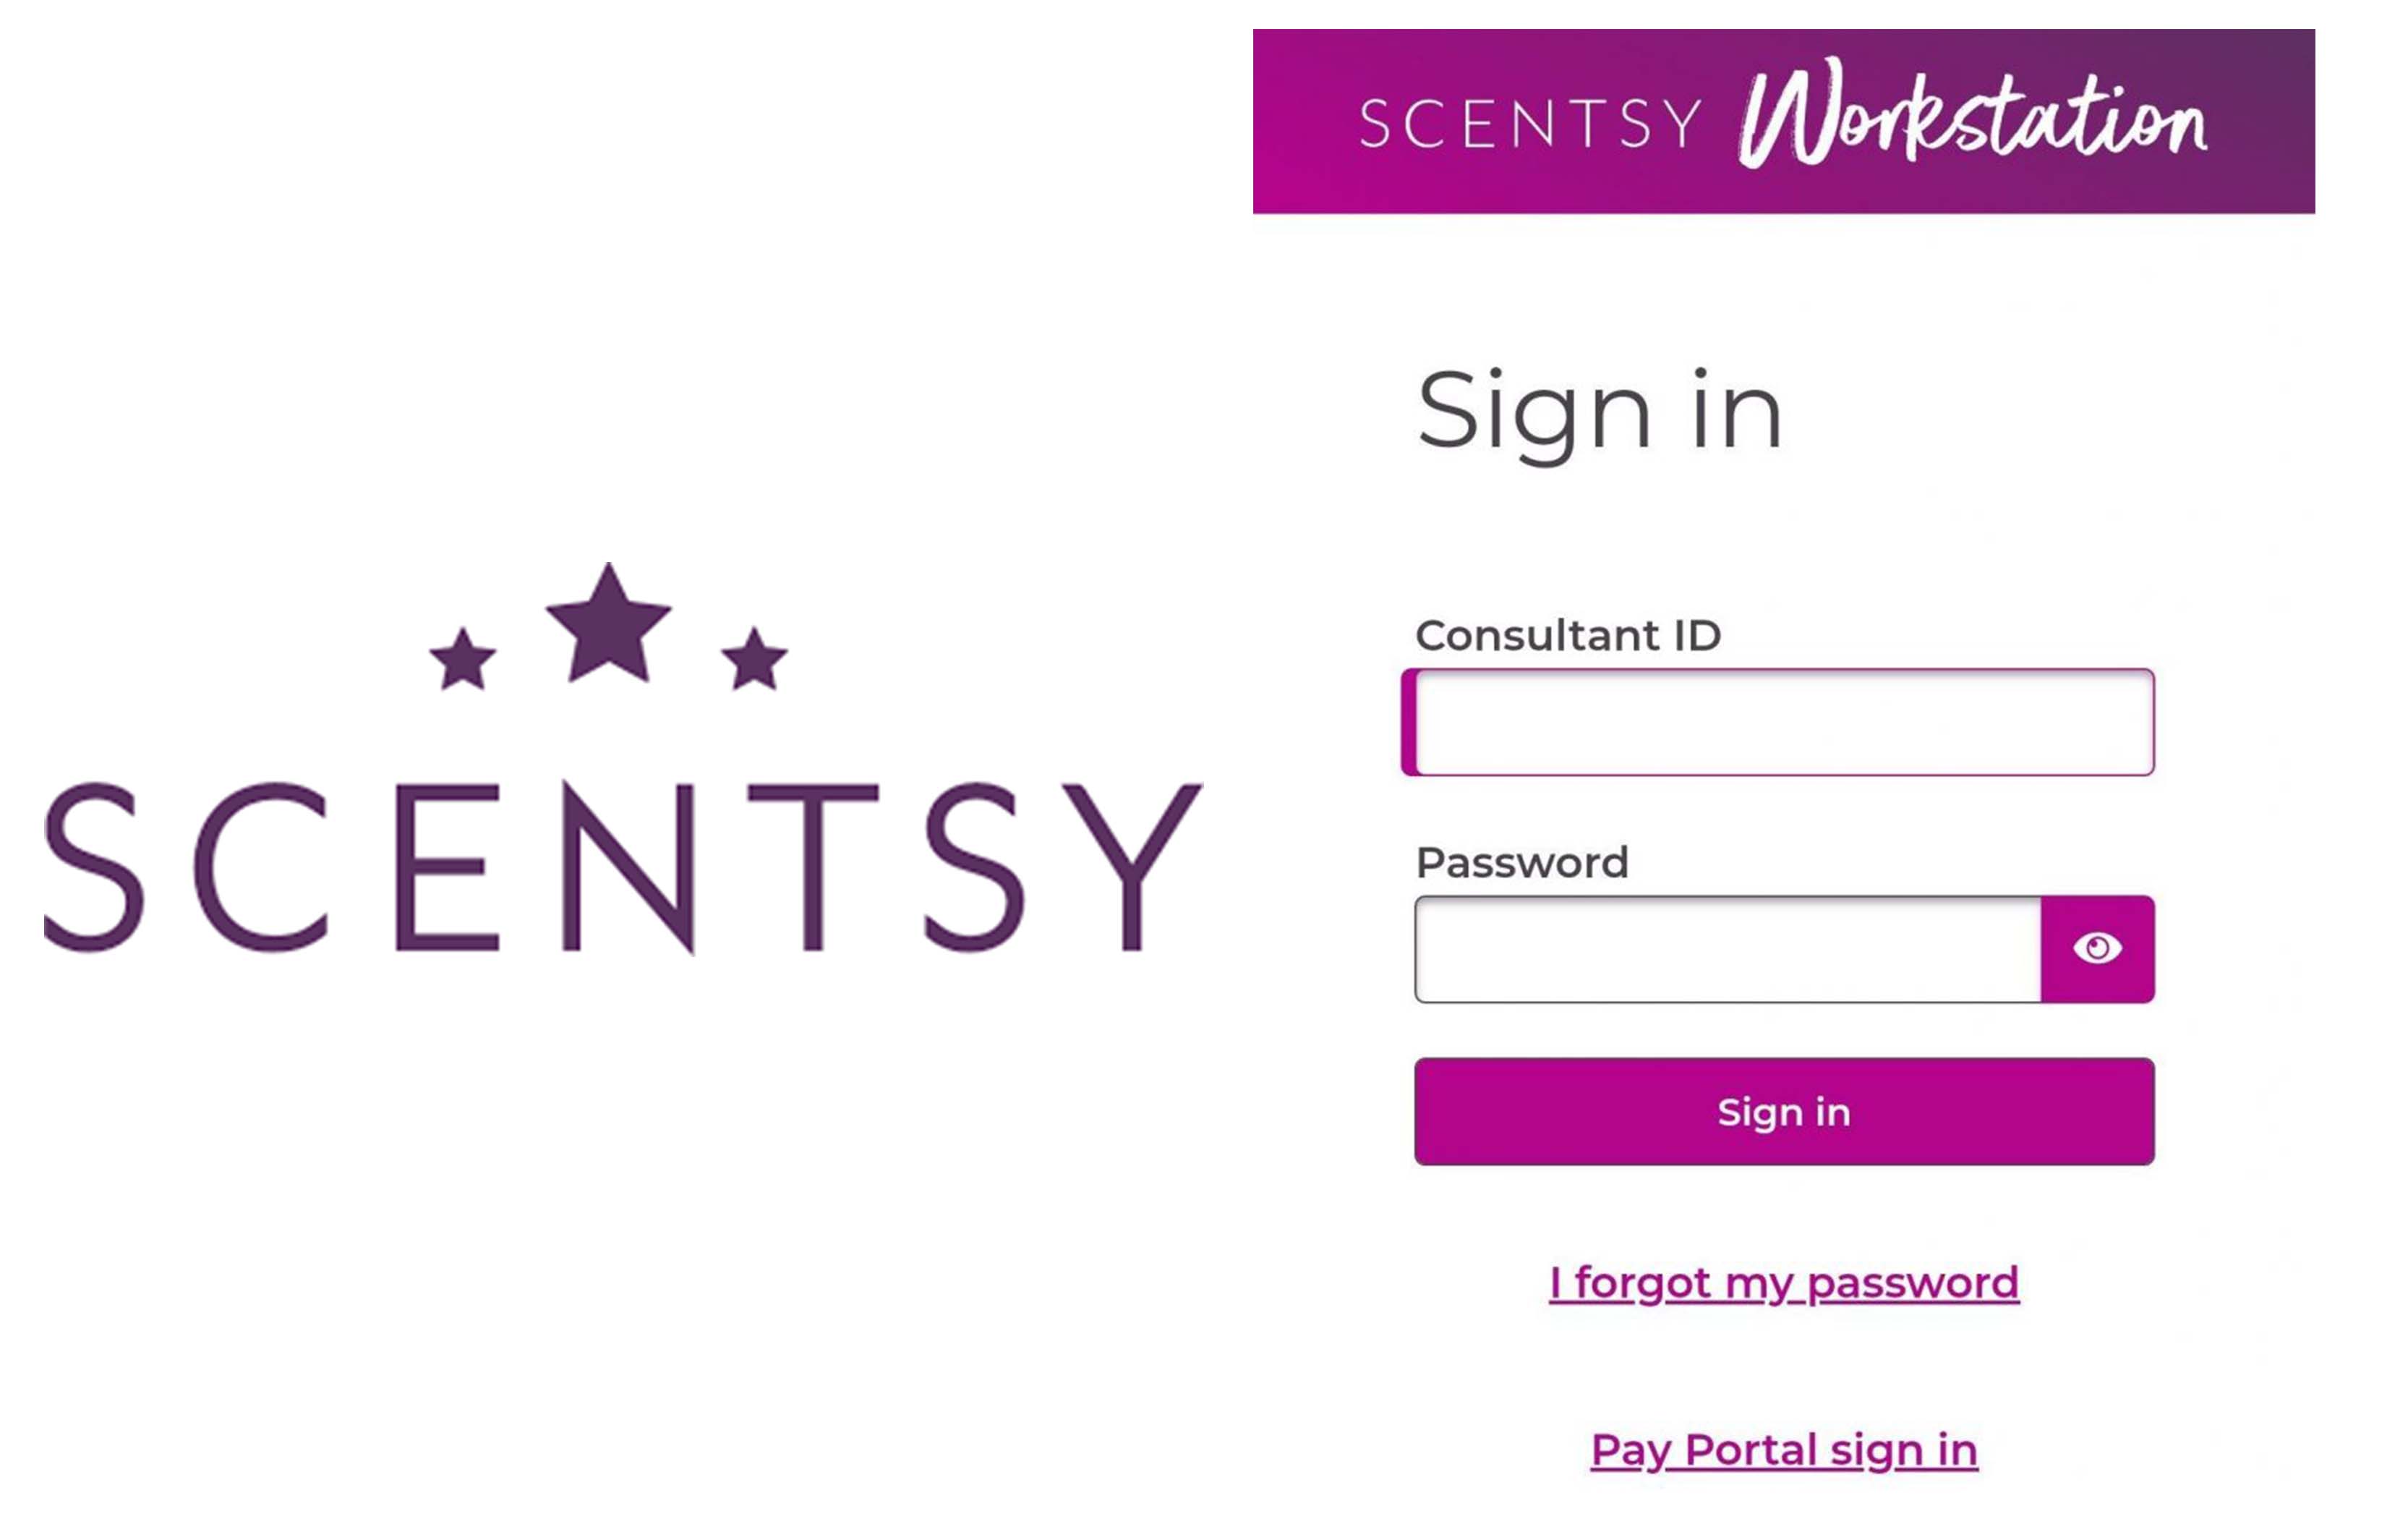 Login Scentsy - How to Login to the Scentsy Portal